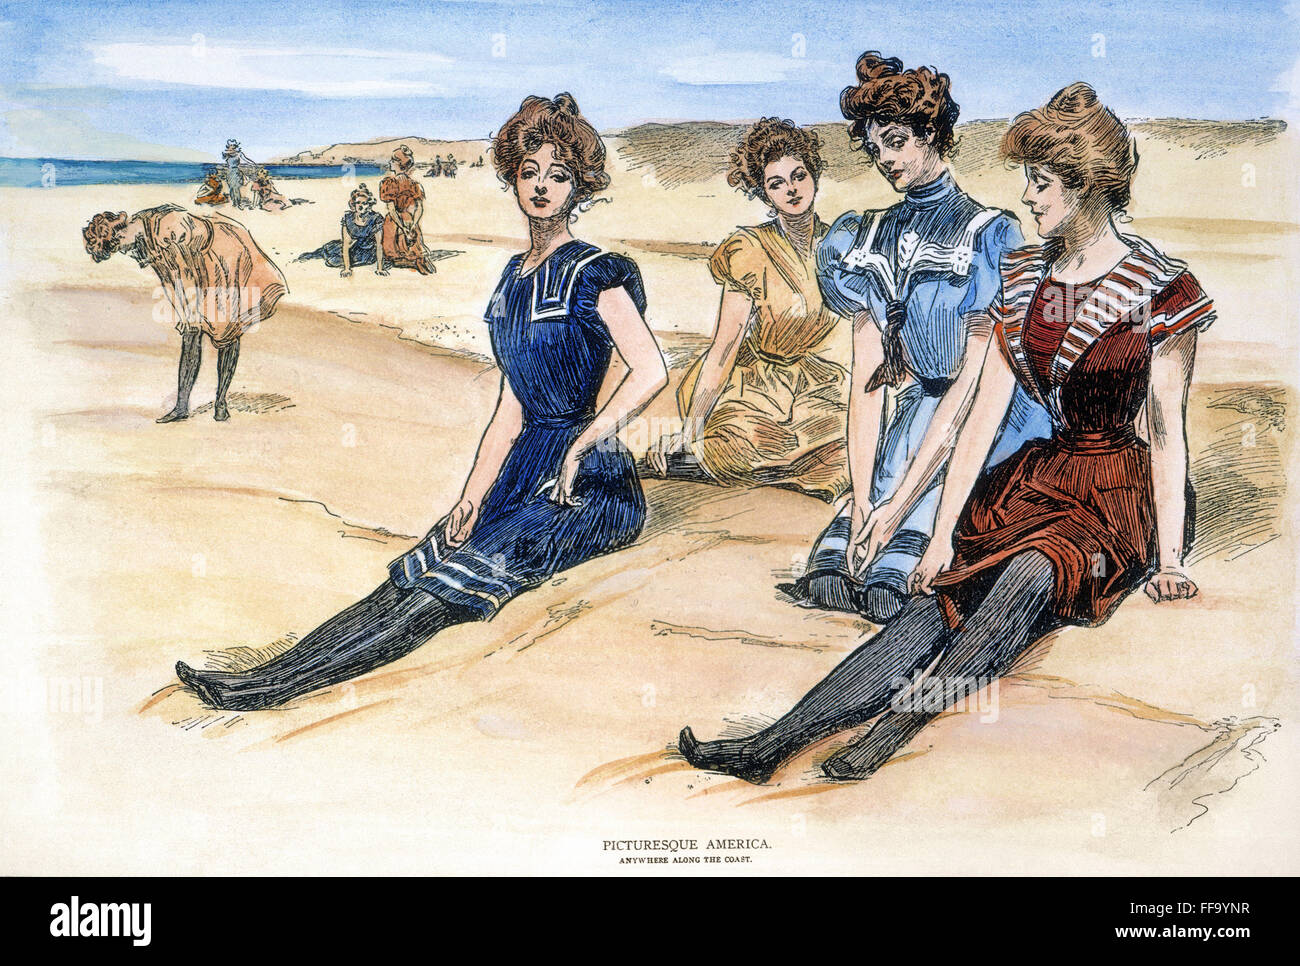 GIBSON GIRLS, 1900. /nPen-and-ink drawing by Charles Dana Gibson of bathing-beauties. Stock Photo